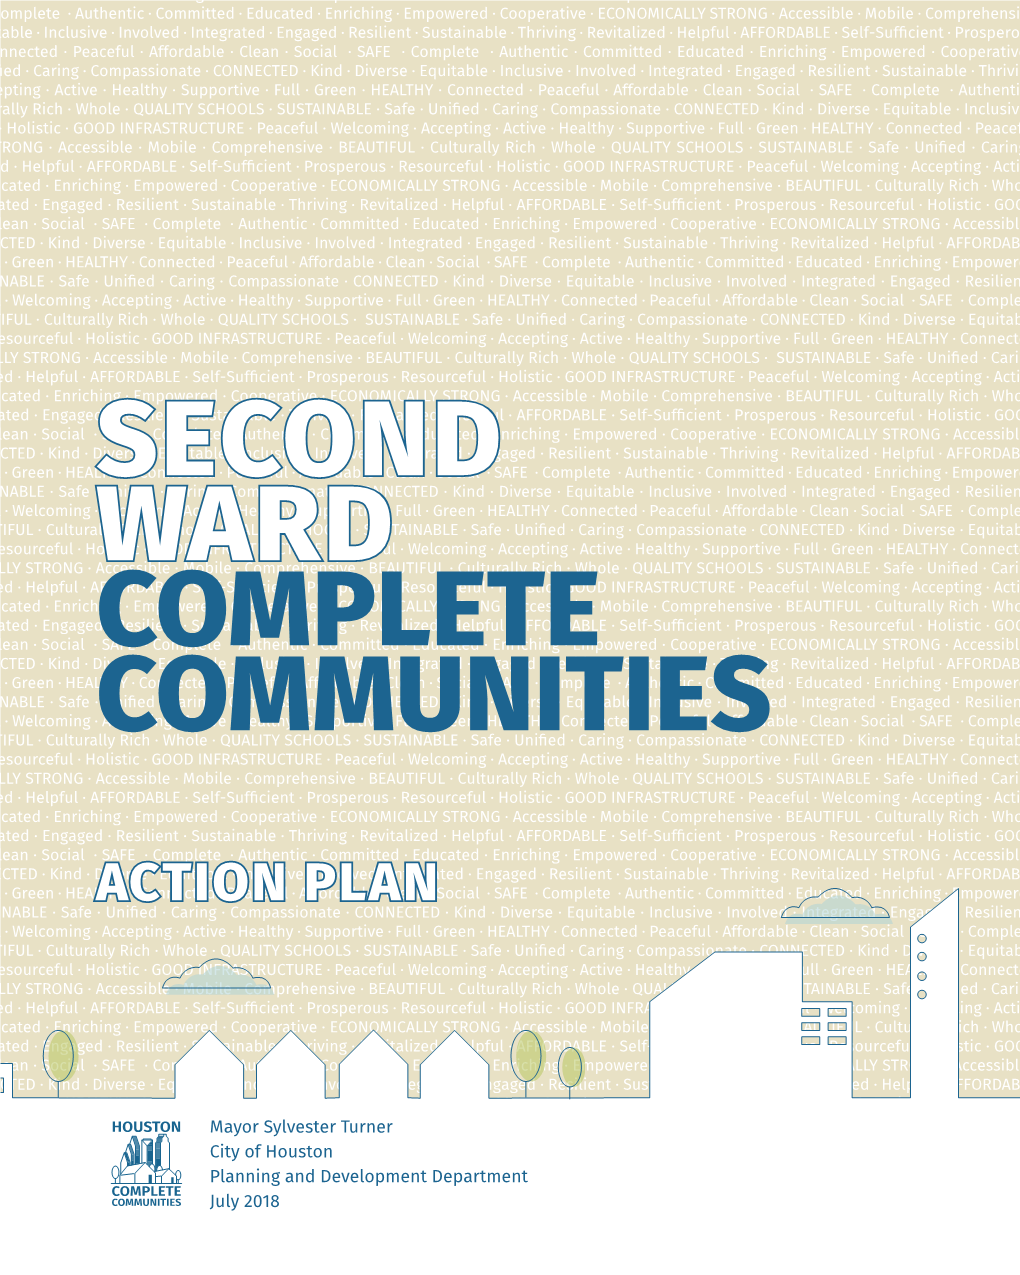 Second Ward COMPLETE COMMUNITIES in April of 2017, Mayor Sylvester Turner Announced the Very Different Strengths and Challenges